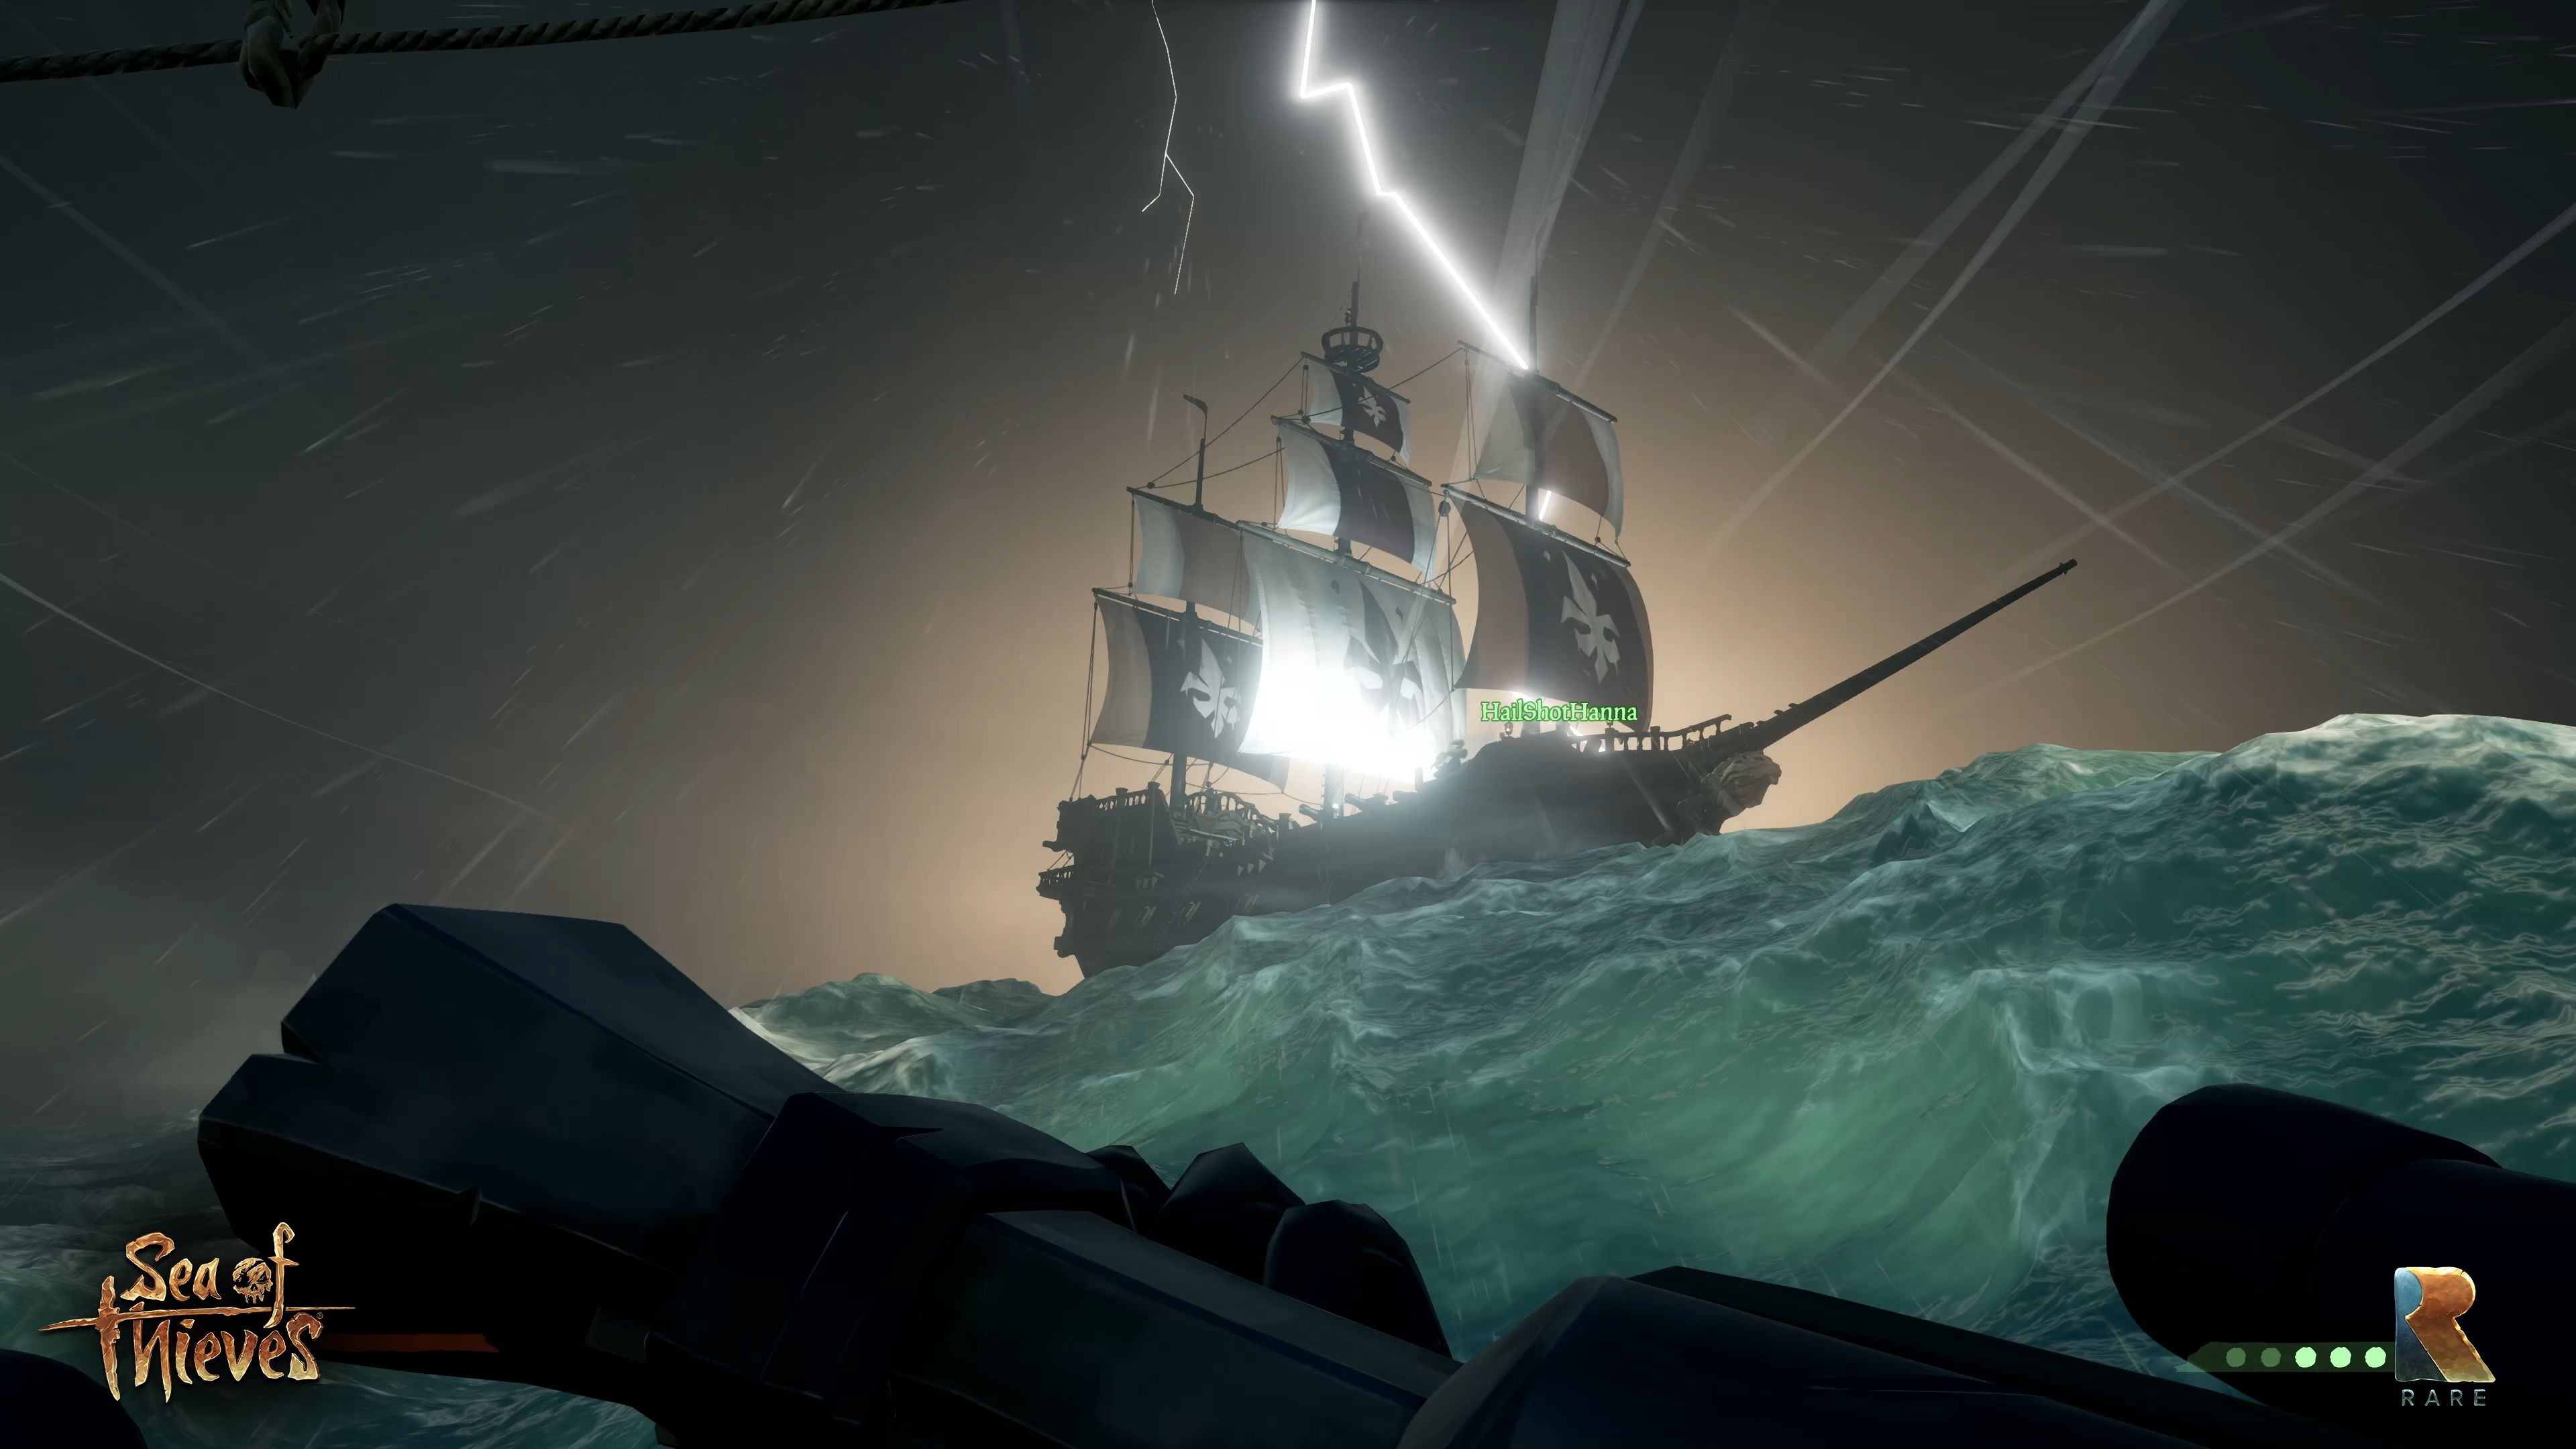 https://s2.gaming-cdn.com/images/products/967/screenshot/sea-of-thieves-pc-xbox-one-wallpaper-4.jpg